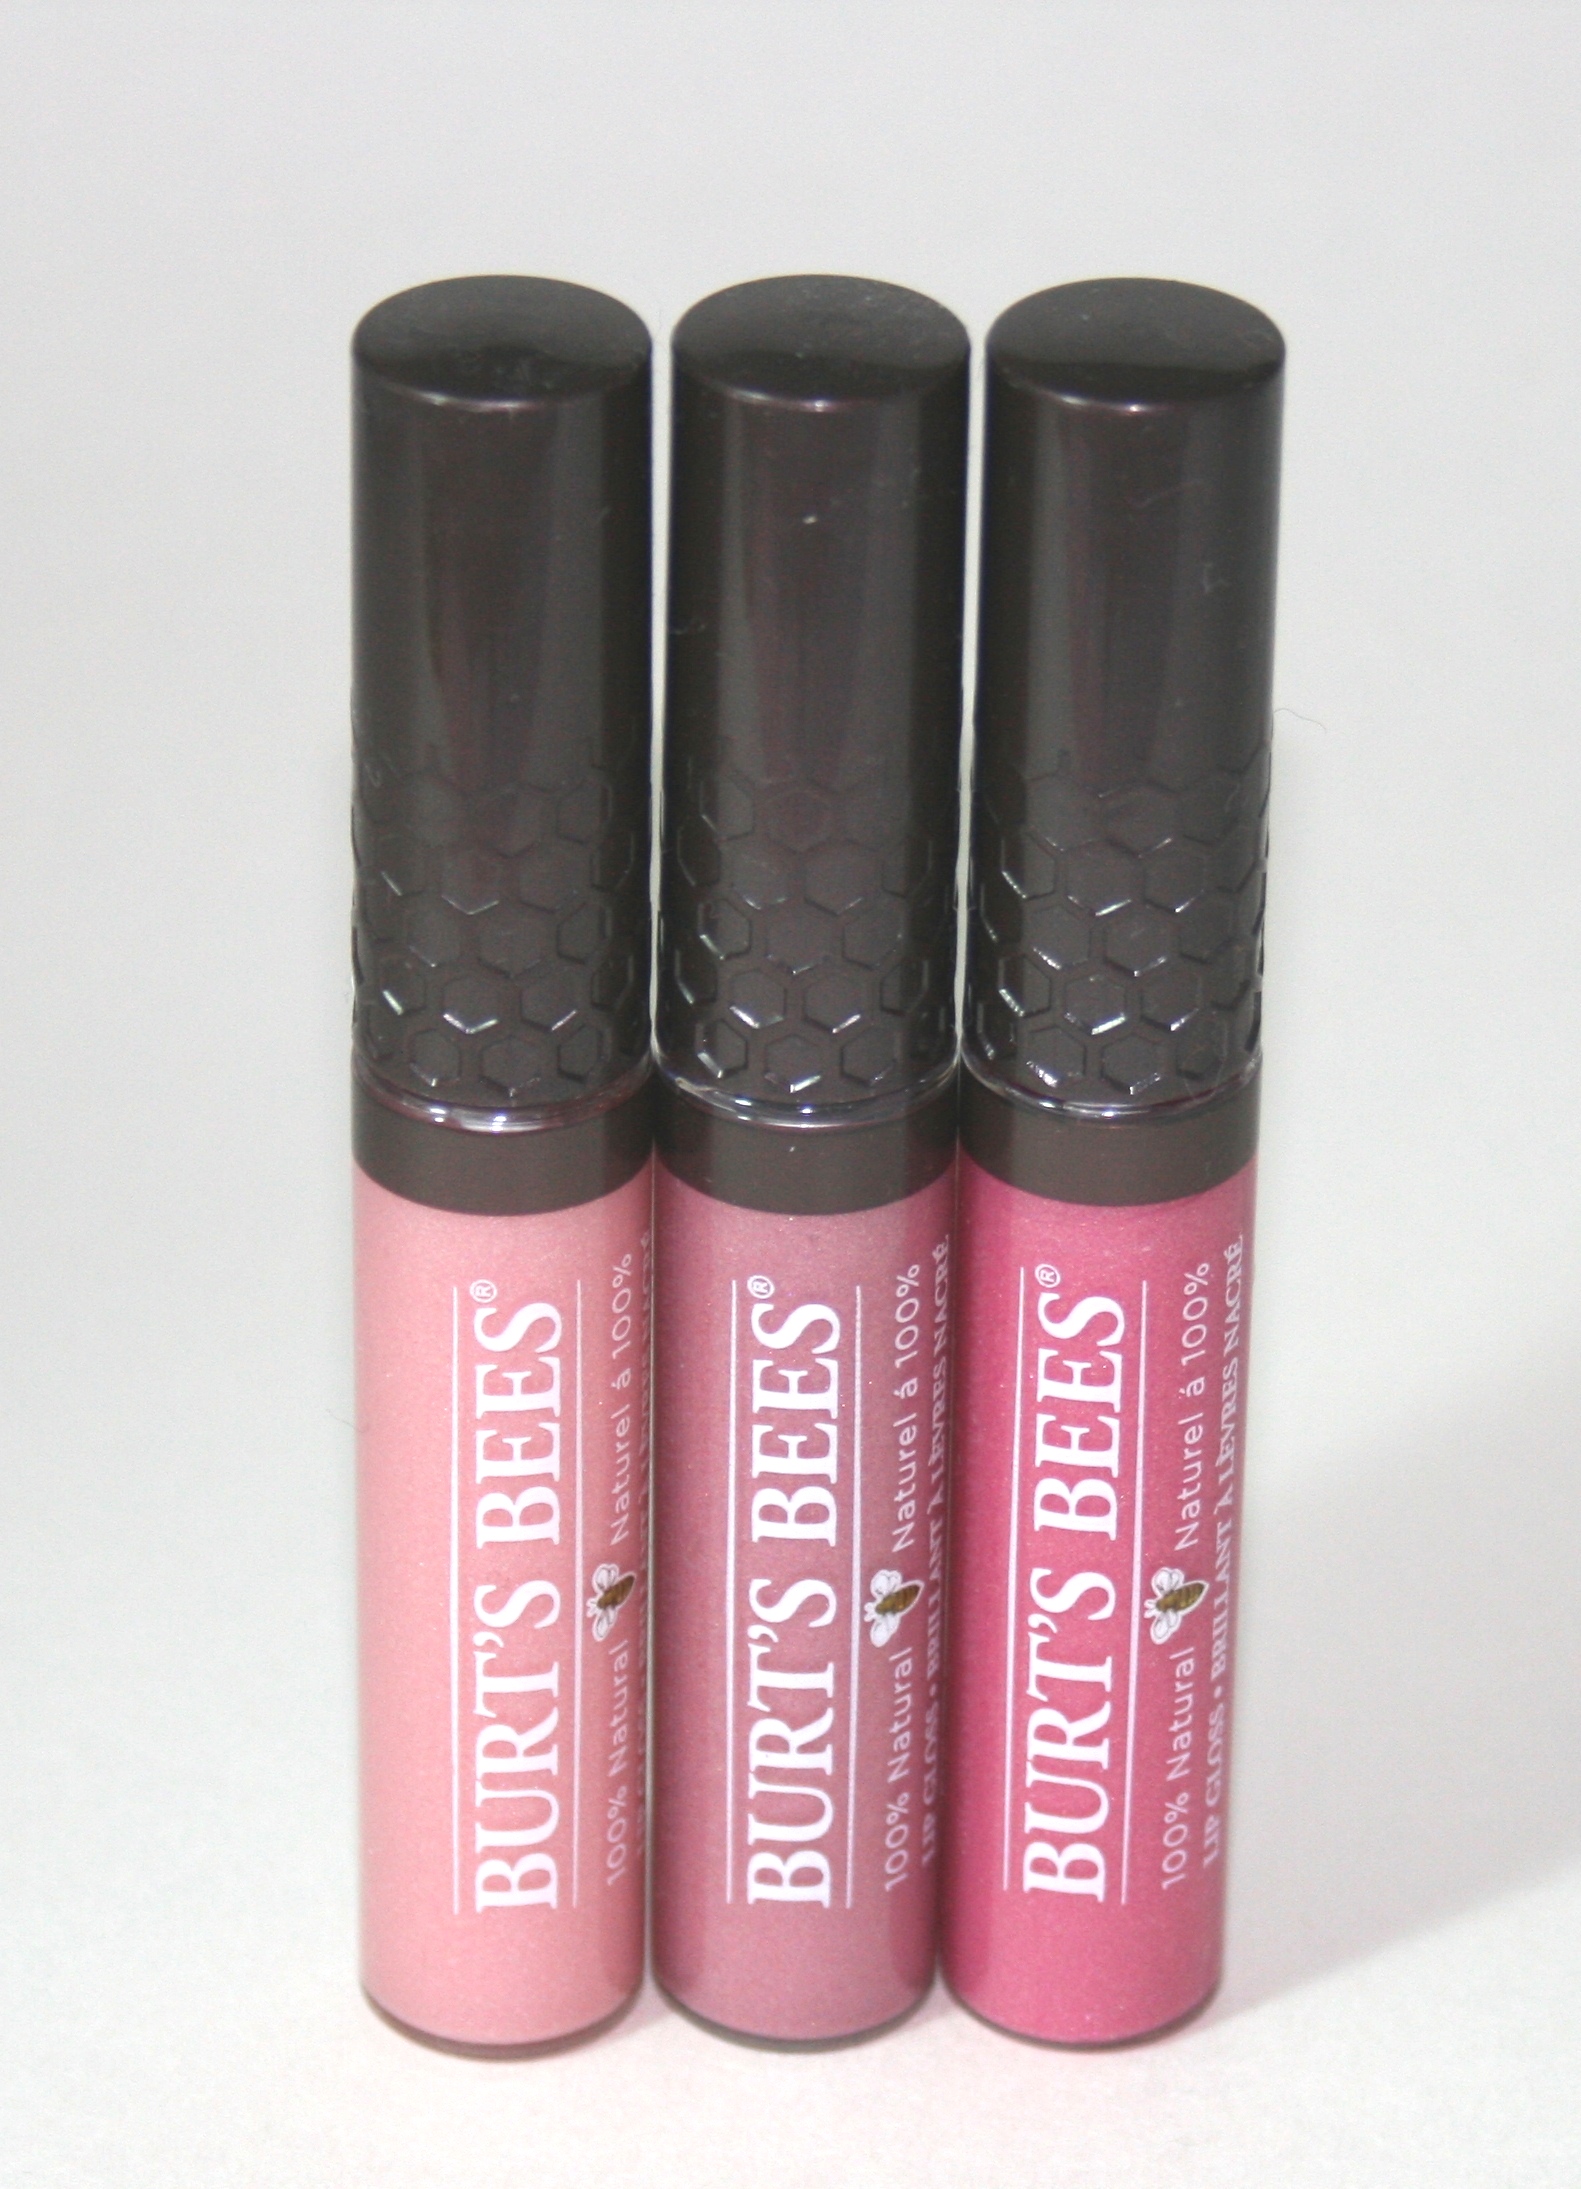 Burt’s Bees Natural Lip Glosses in Nearly Dusk, Rosy Dawn and Ocean Sunrise